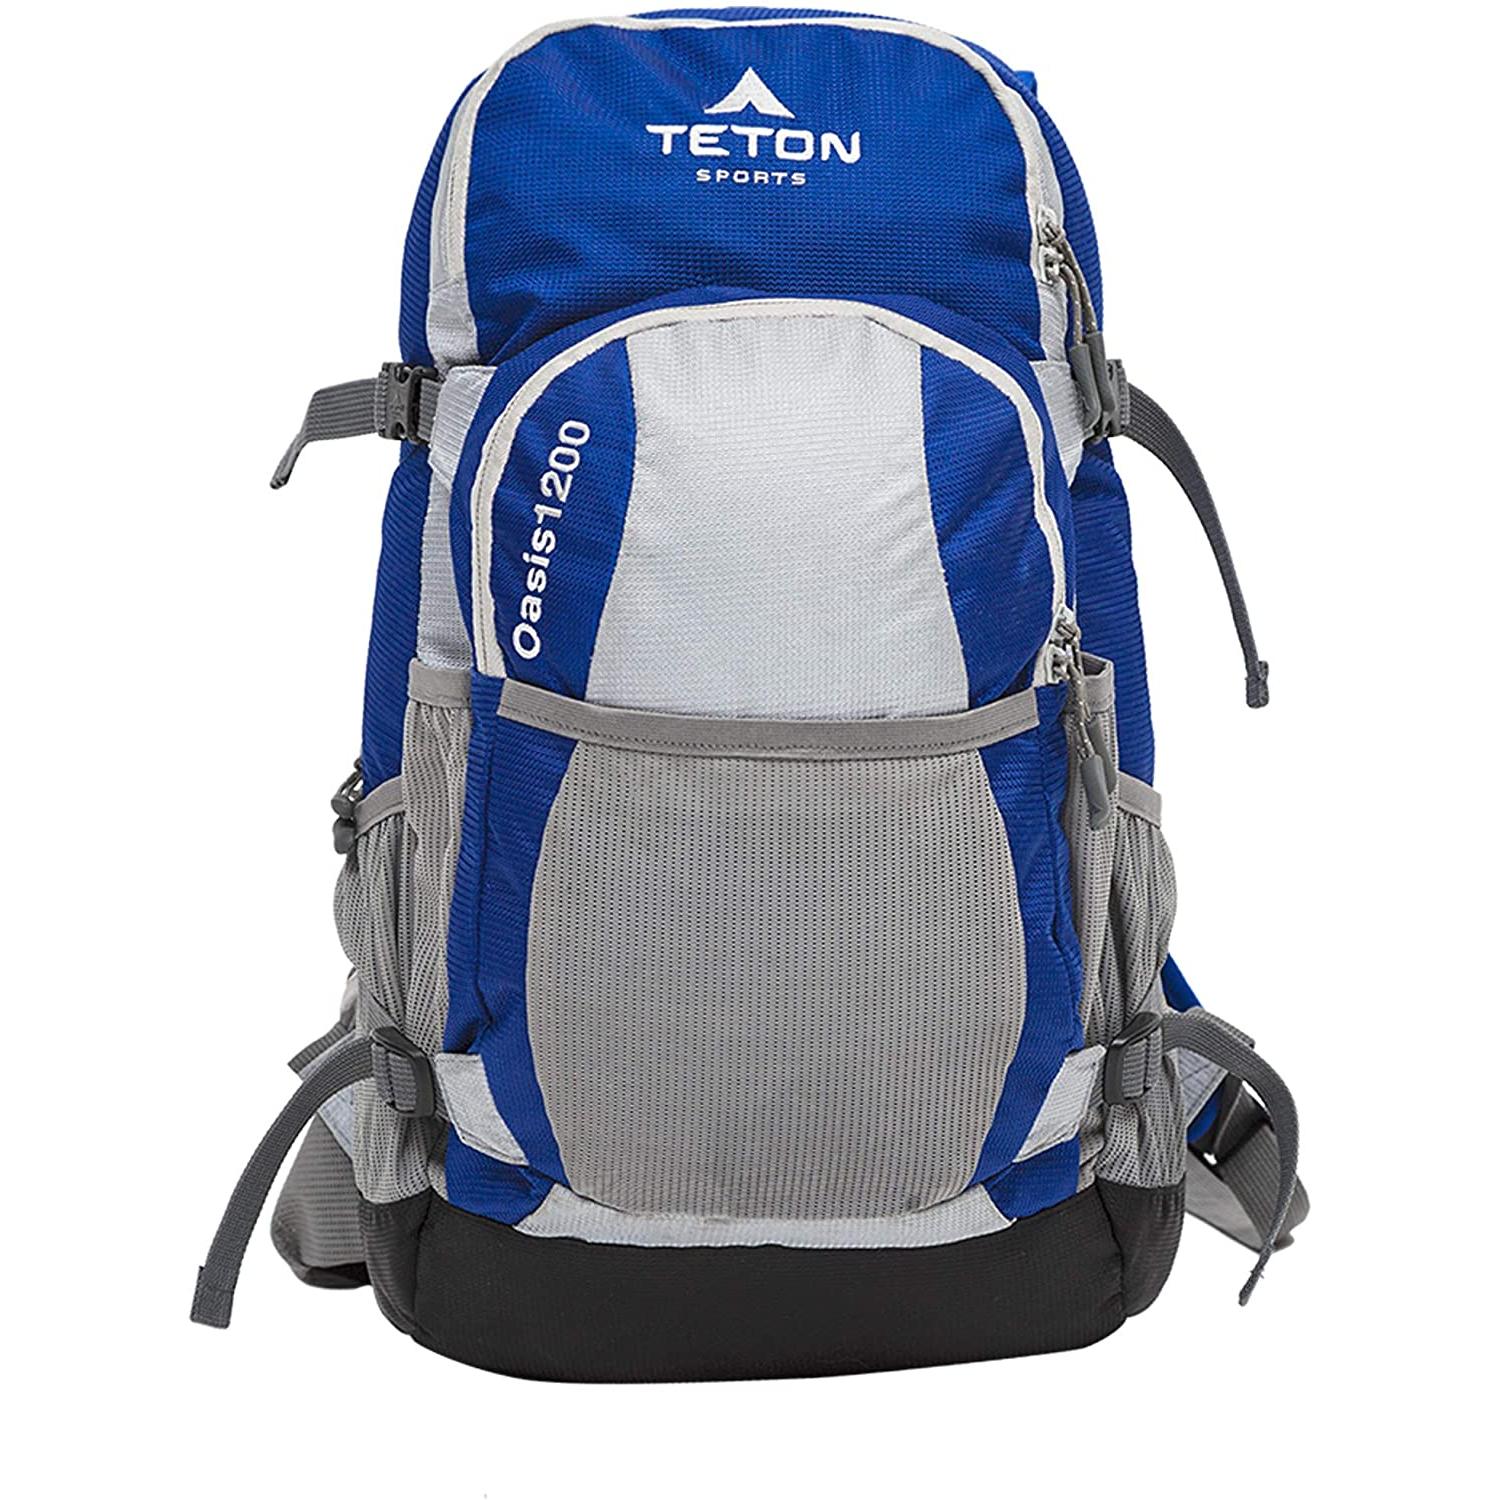 TETON Sports Oasis 1200 Hydration Pack; Free 3-Liter Hydration Bladder; Backpacking, Hiking, Running, Cycling, and Climbing